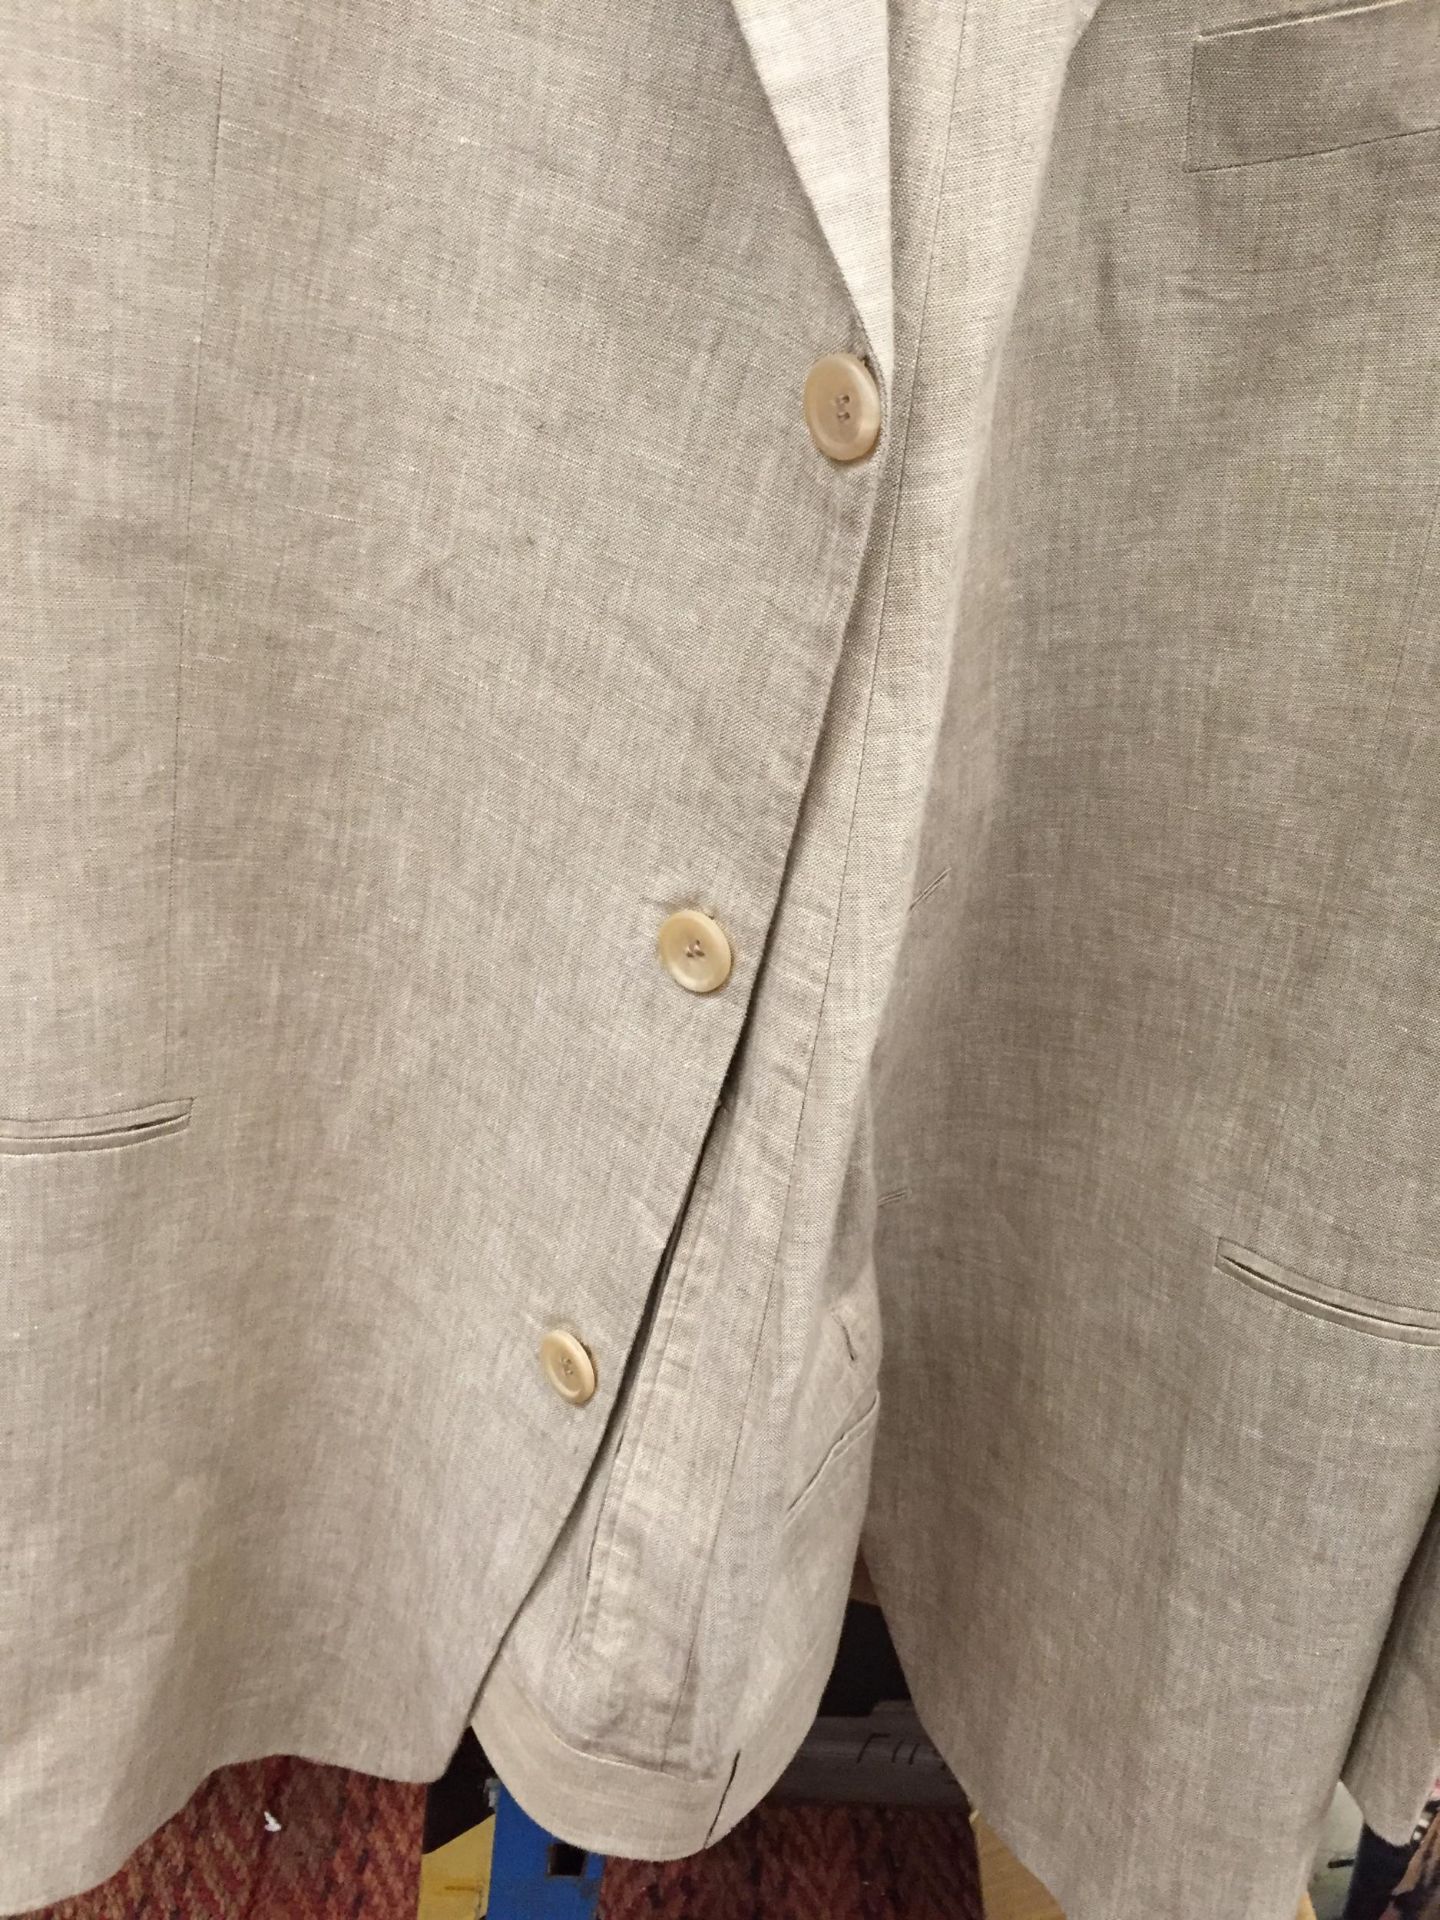 A WHITE LINEN SUIT AND TROUSERS - Image 2 of 3